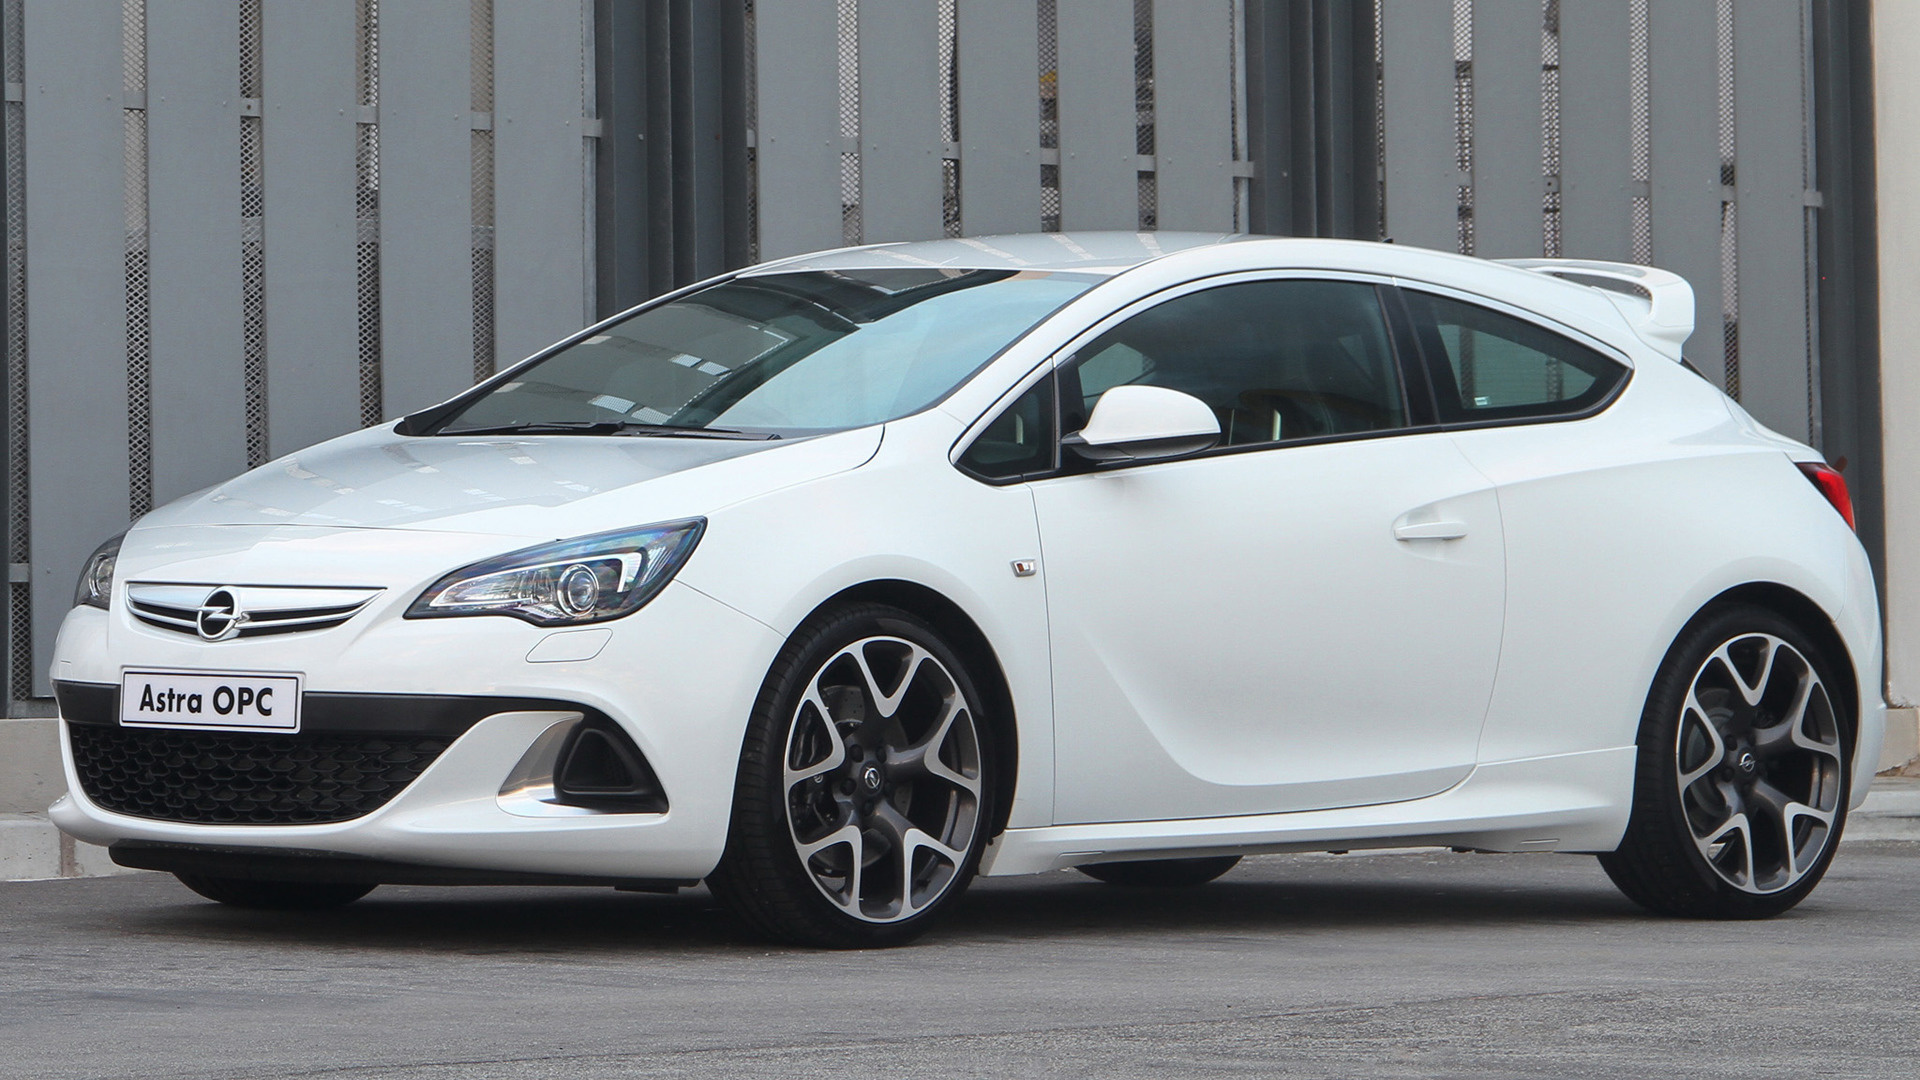 HD opel astra gtc wallpapers